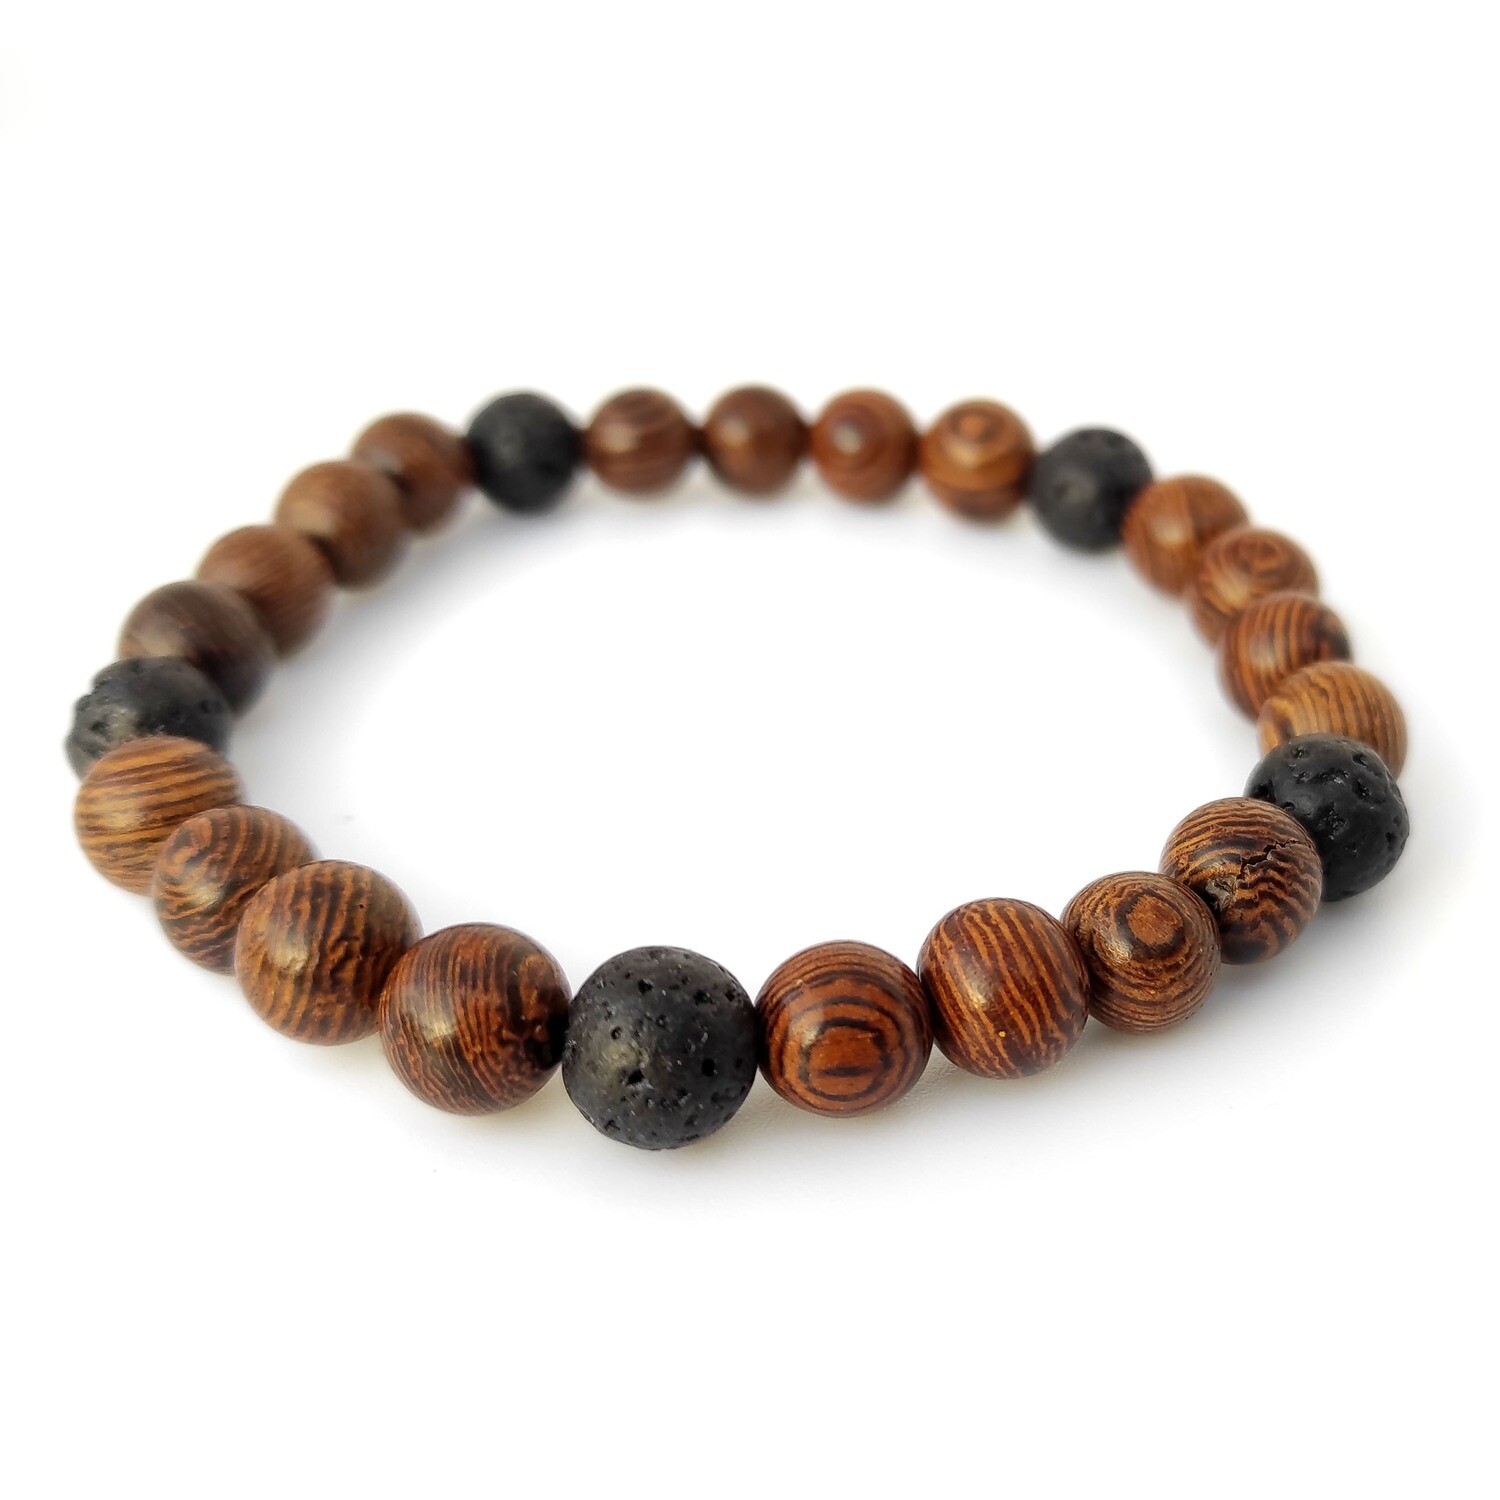 Lava Rock with brown wooden beads bracelet